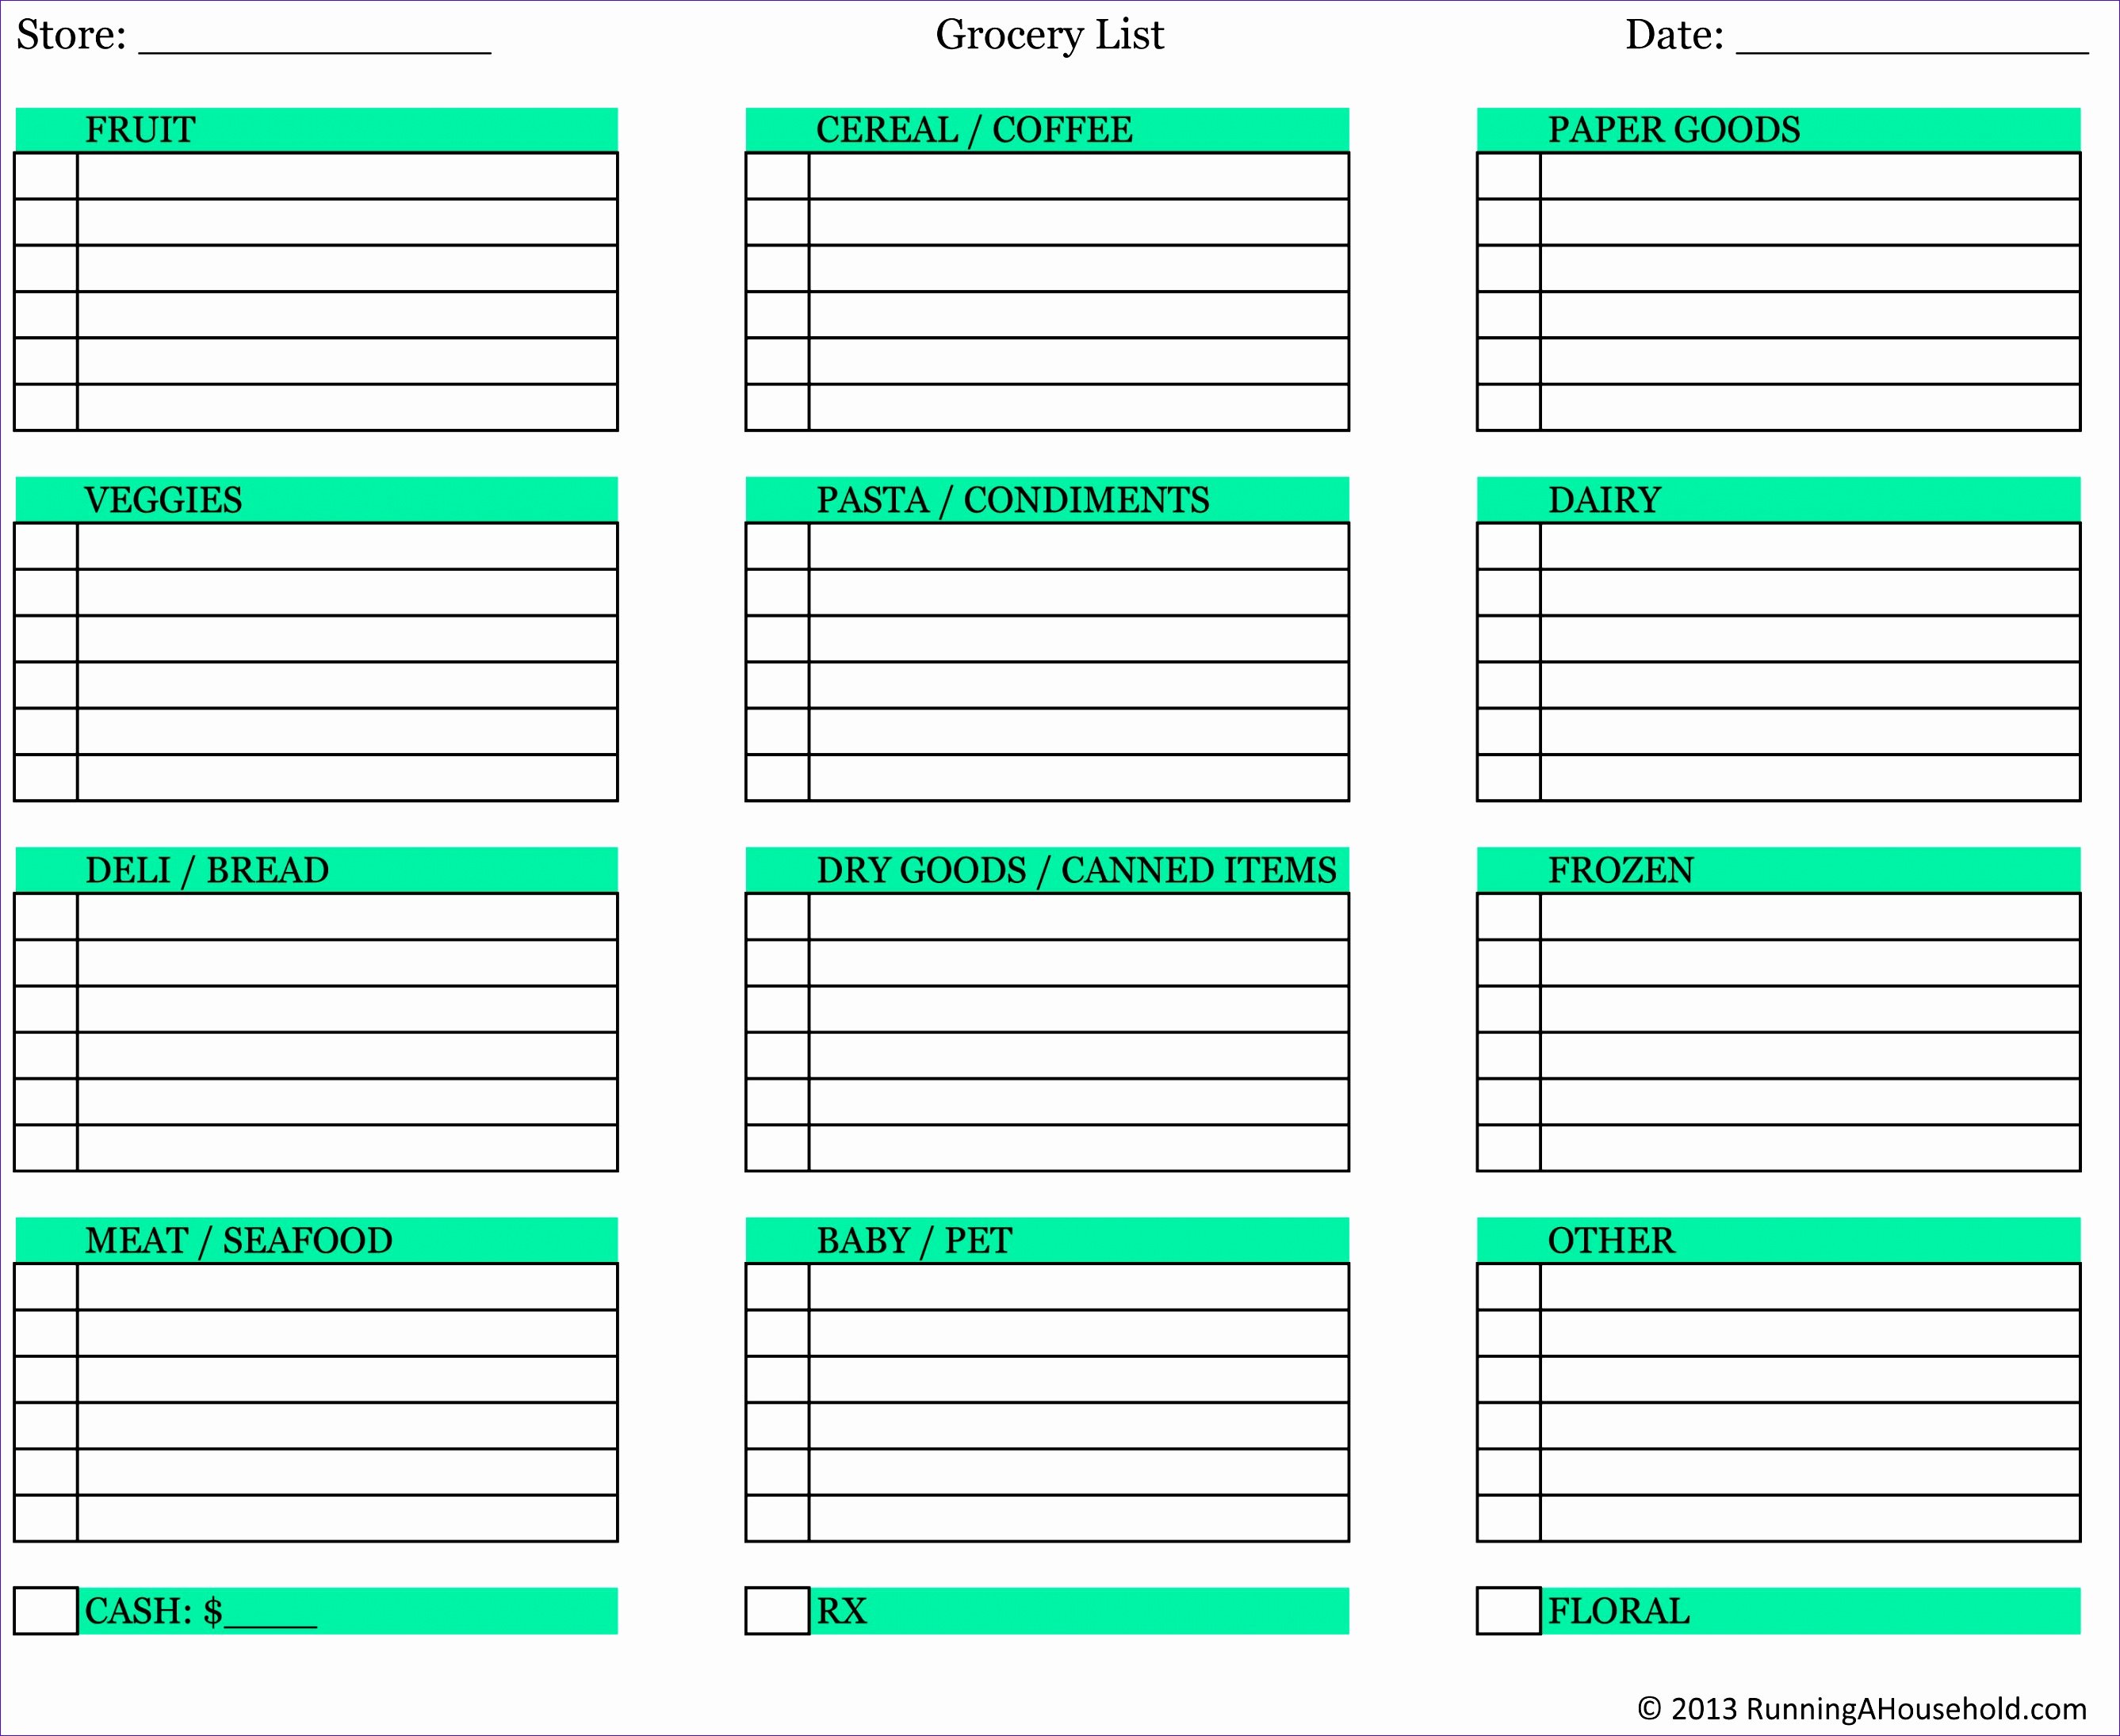 Shopping List Template Excel New 10 Grocery List Template Excel Free Download